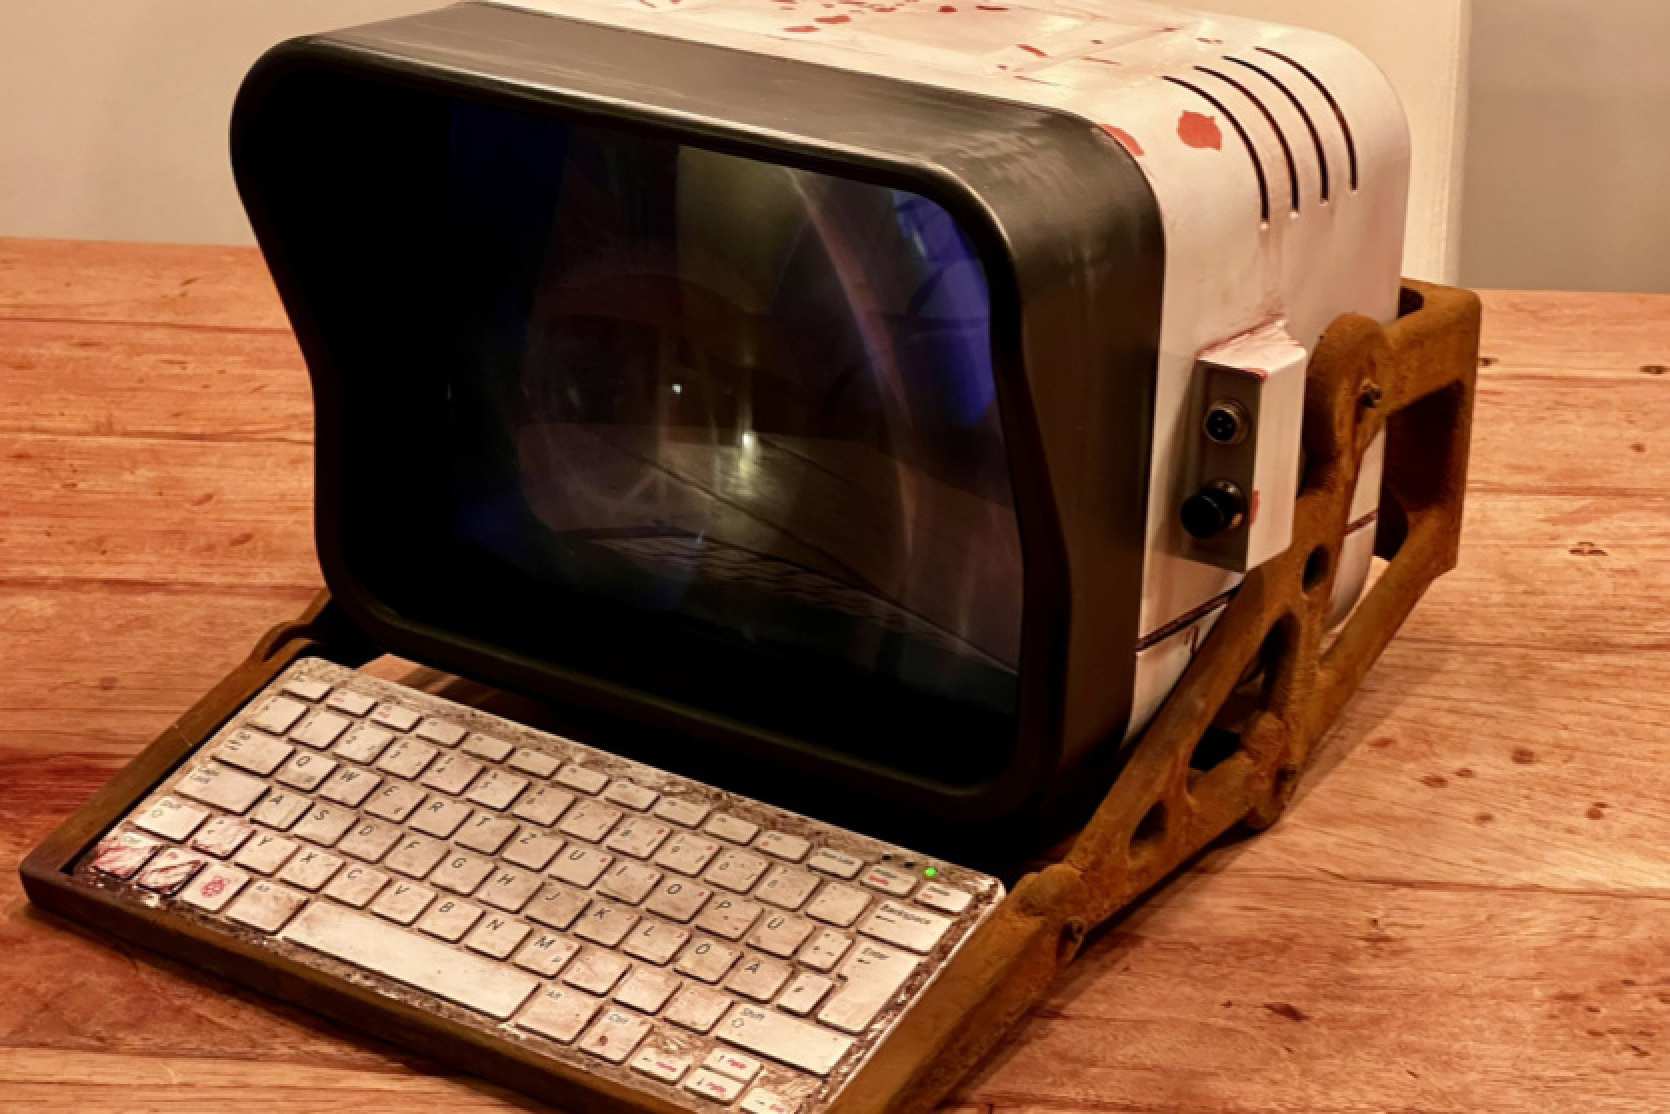 A terminal recreated from the Fallout games controls a smart home using a Raspberry Pi